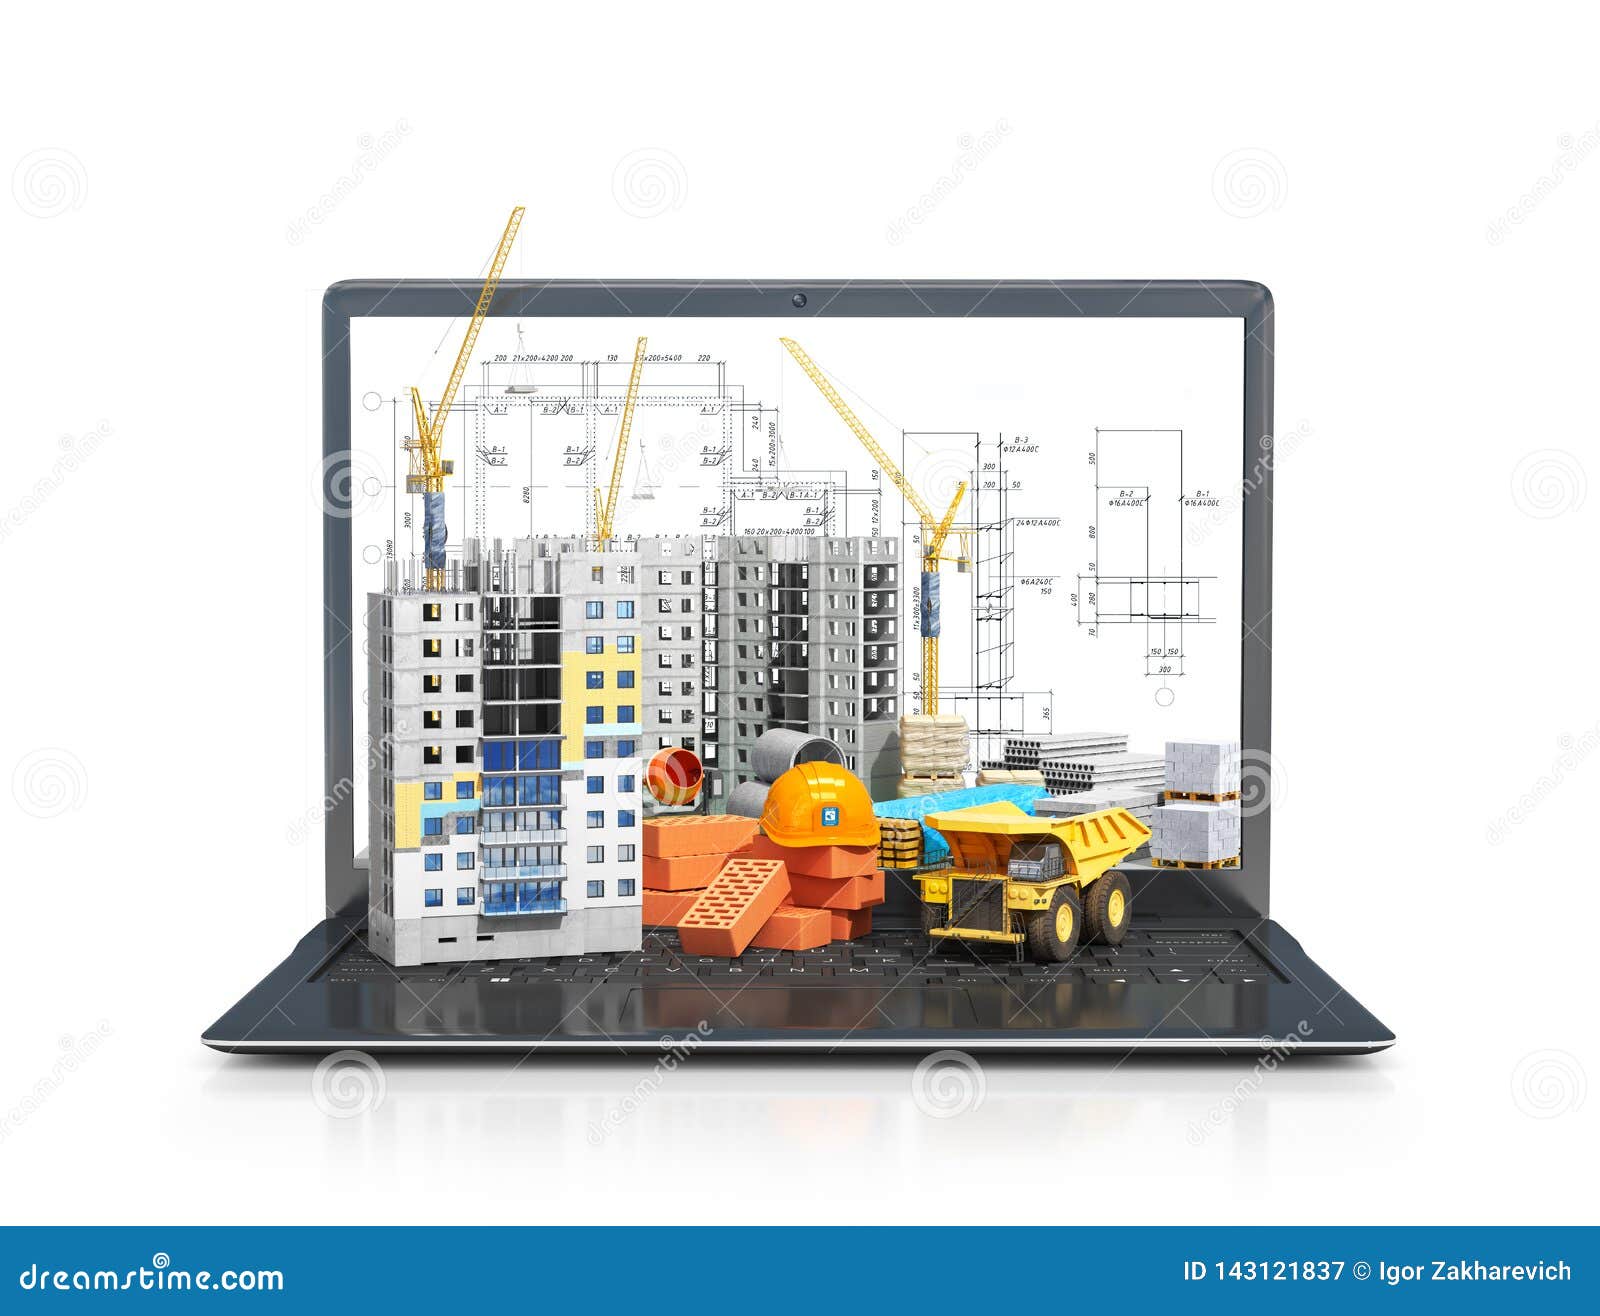 construction site on the screen of a portable computer, skyscraper building, building materials